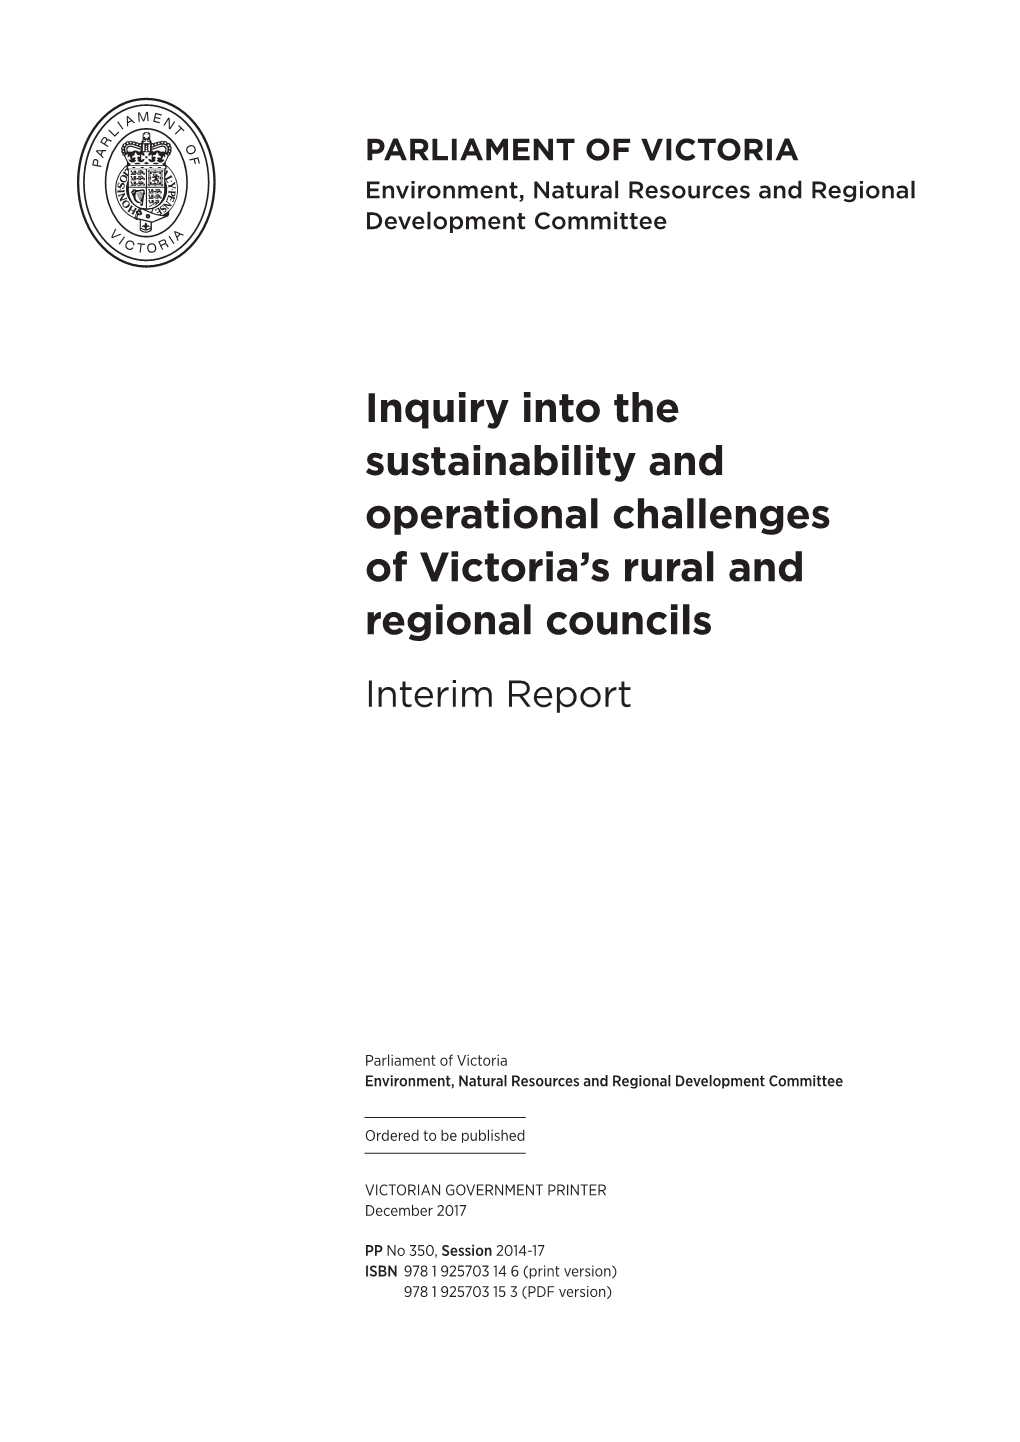 Inquiry Into the Sustainability and Operational Challenges of Victoria's Rural and Regional Councils